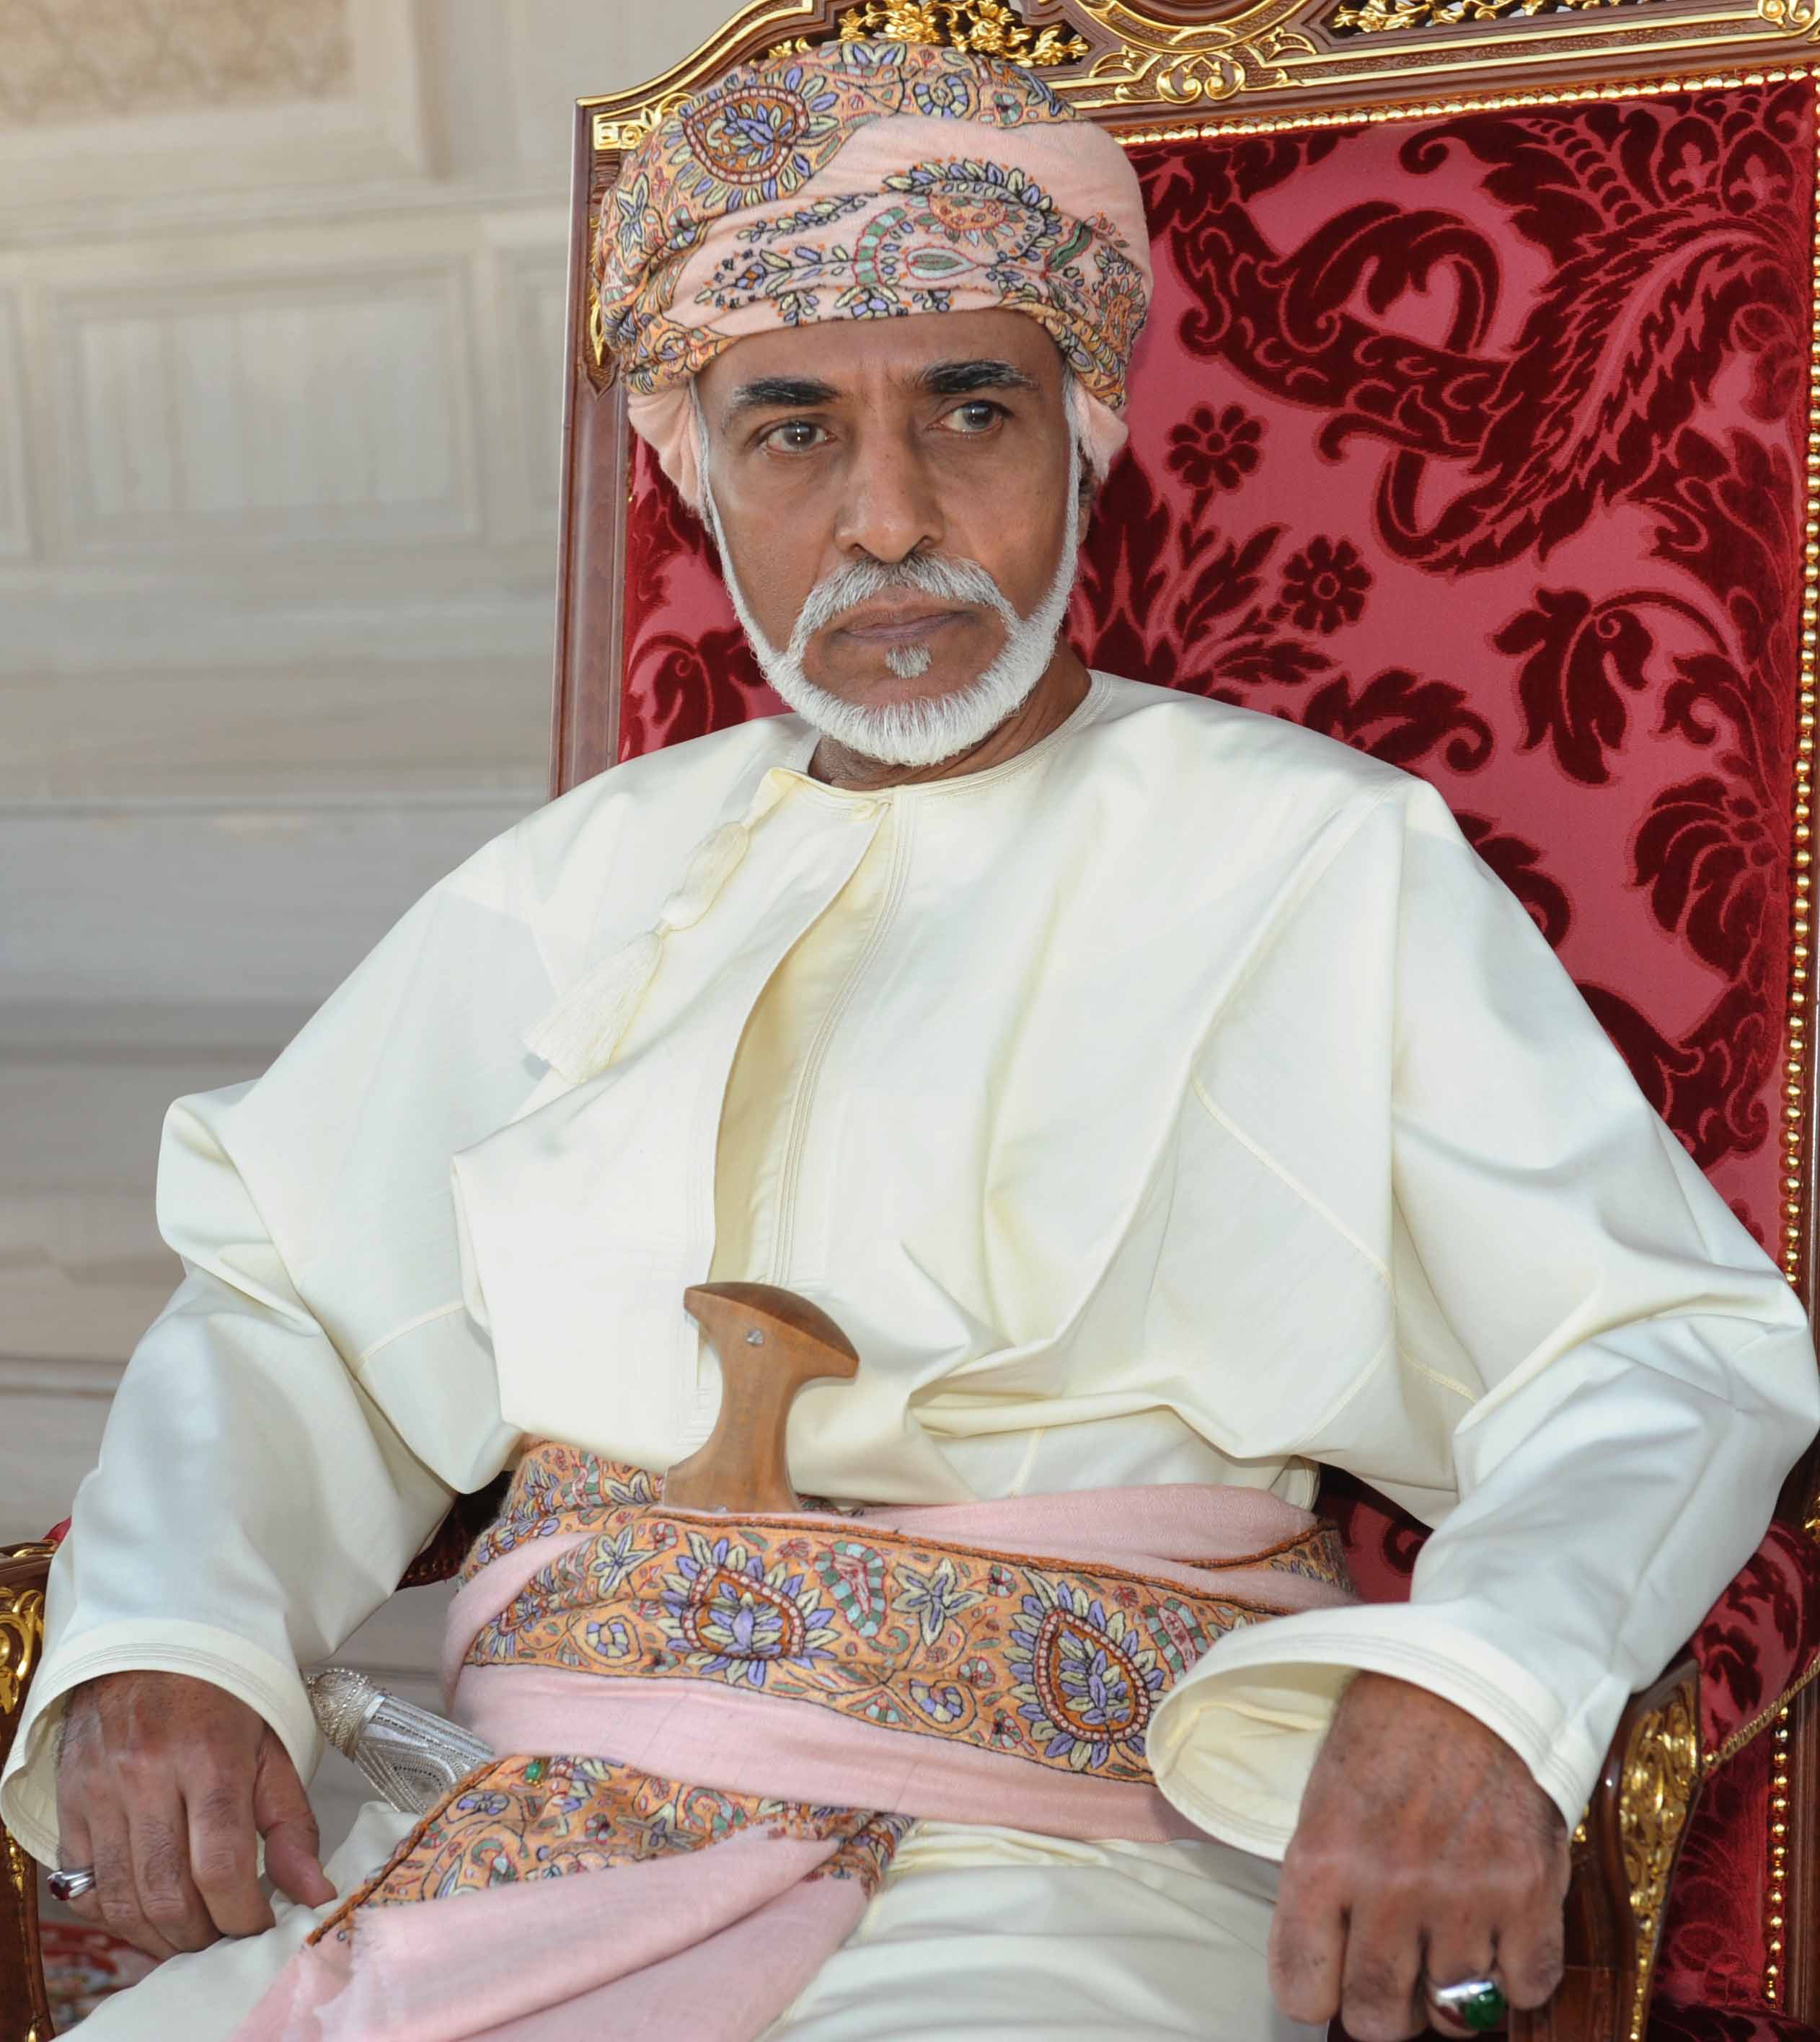 HM Sultan Qaboos greets President Trump for U.S. Independence Day